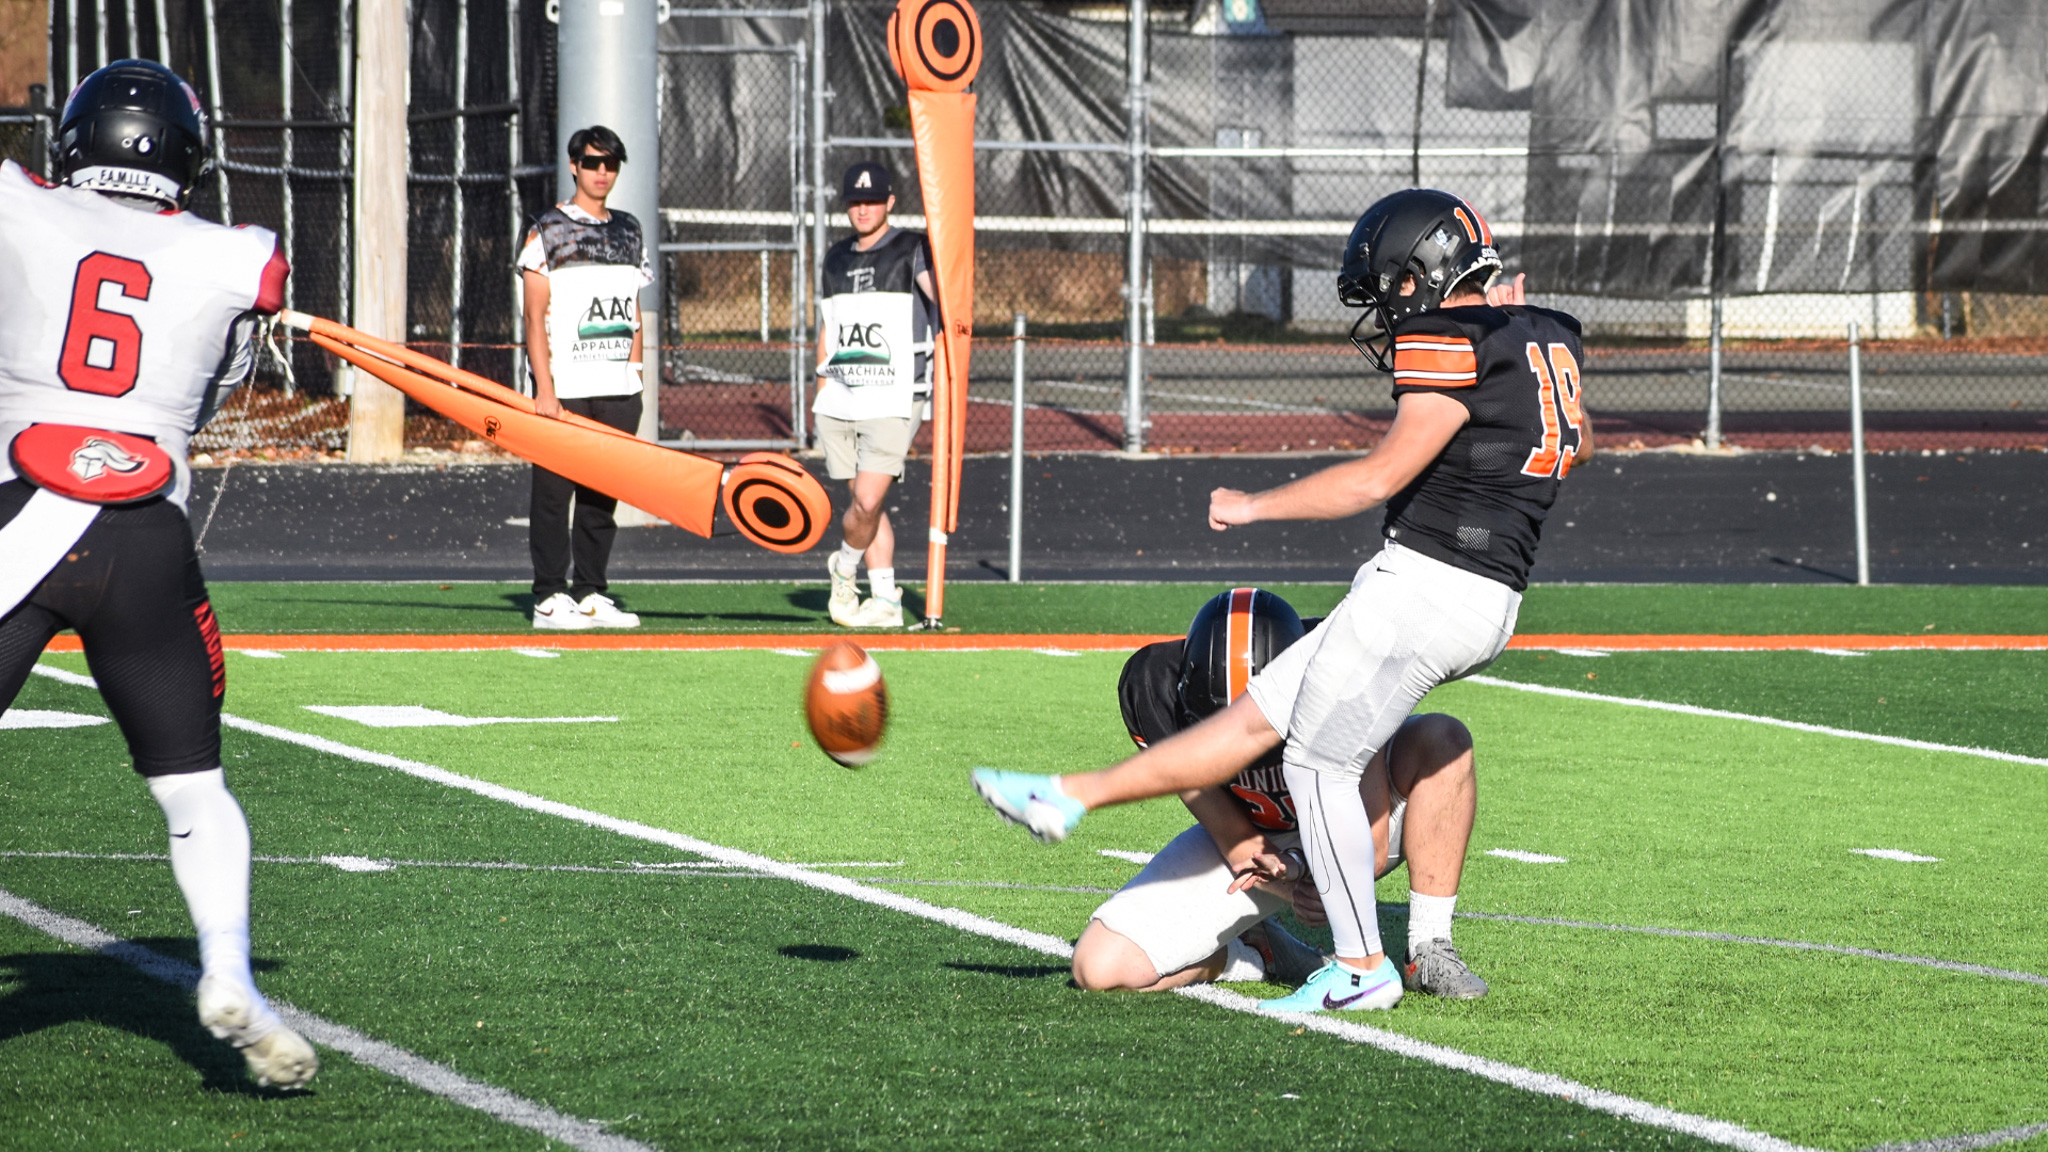 Union kicker Dustin Brown named AAC Special Teams Player of the Week